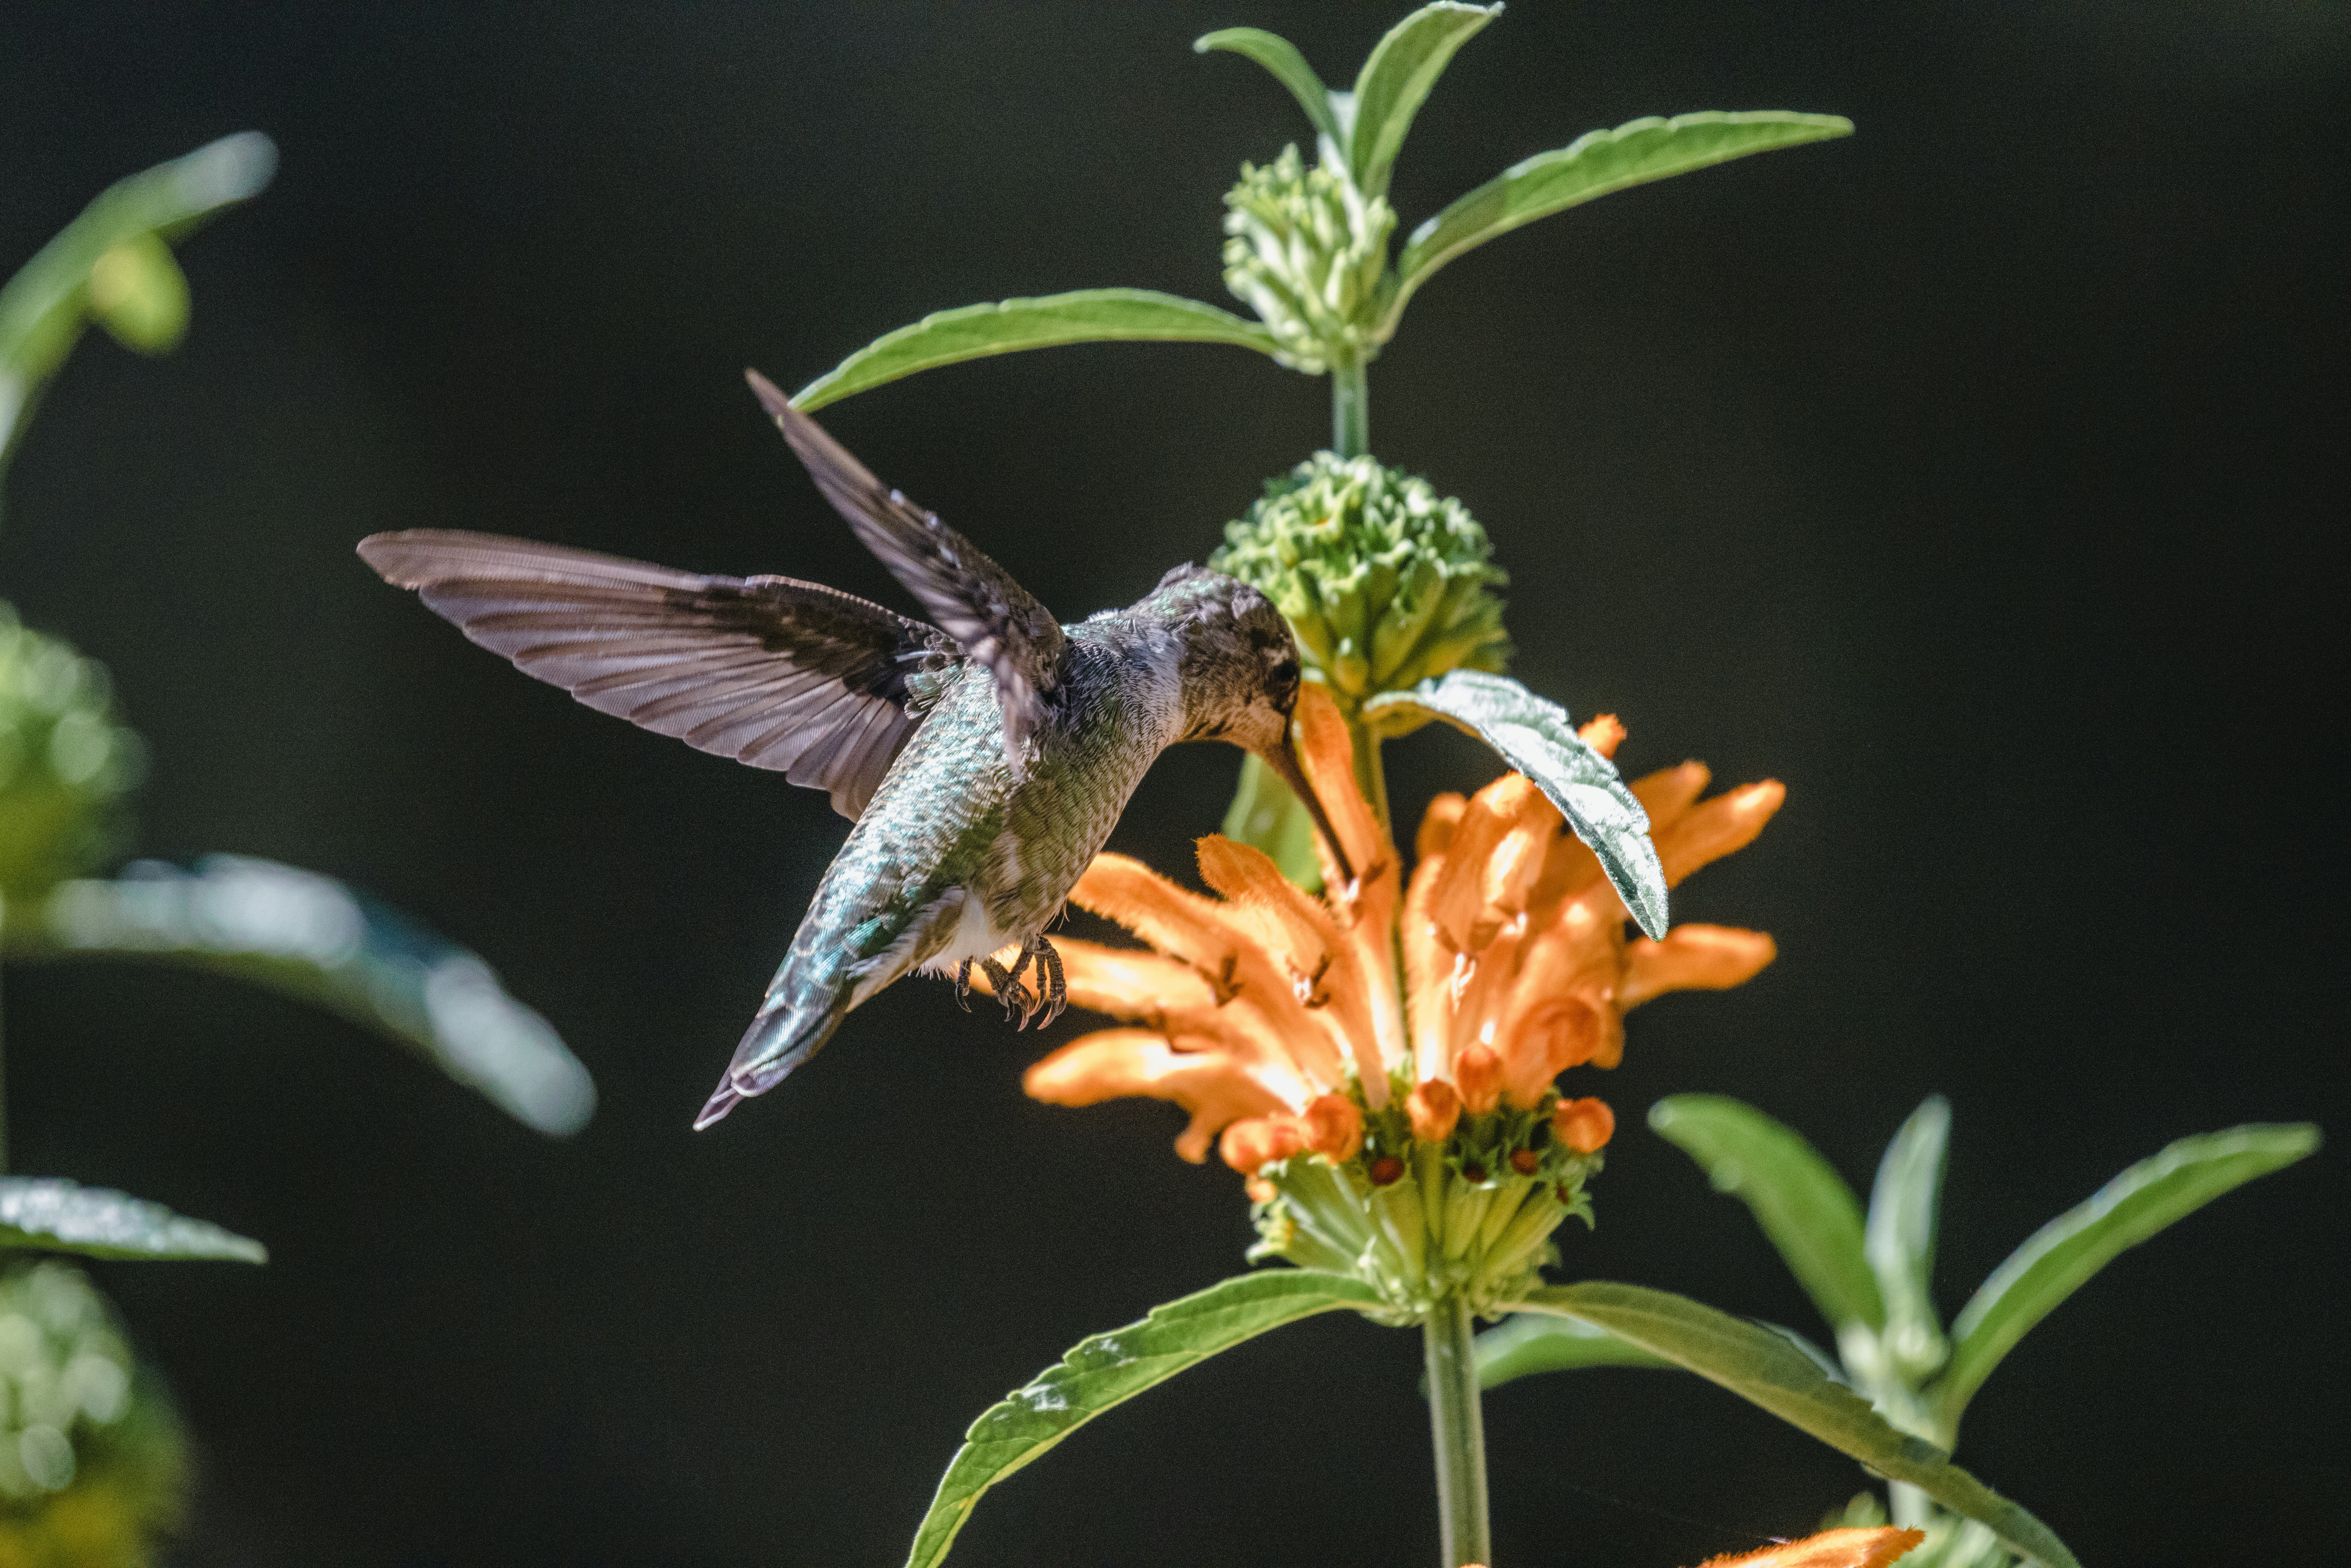 green and gray hummingbird flying over yellow flowers